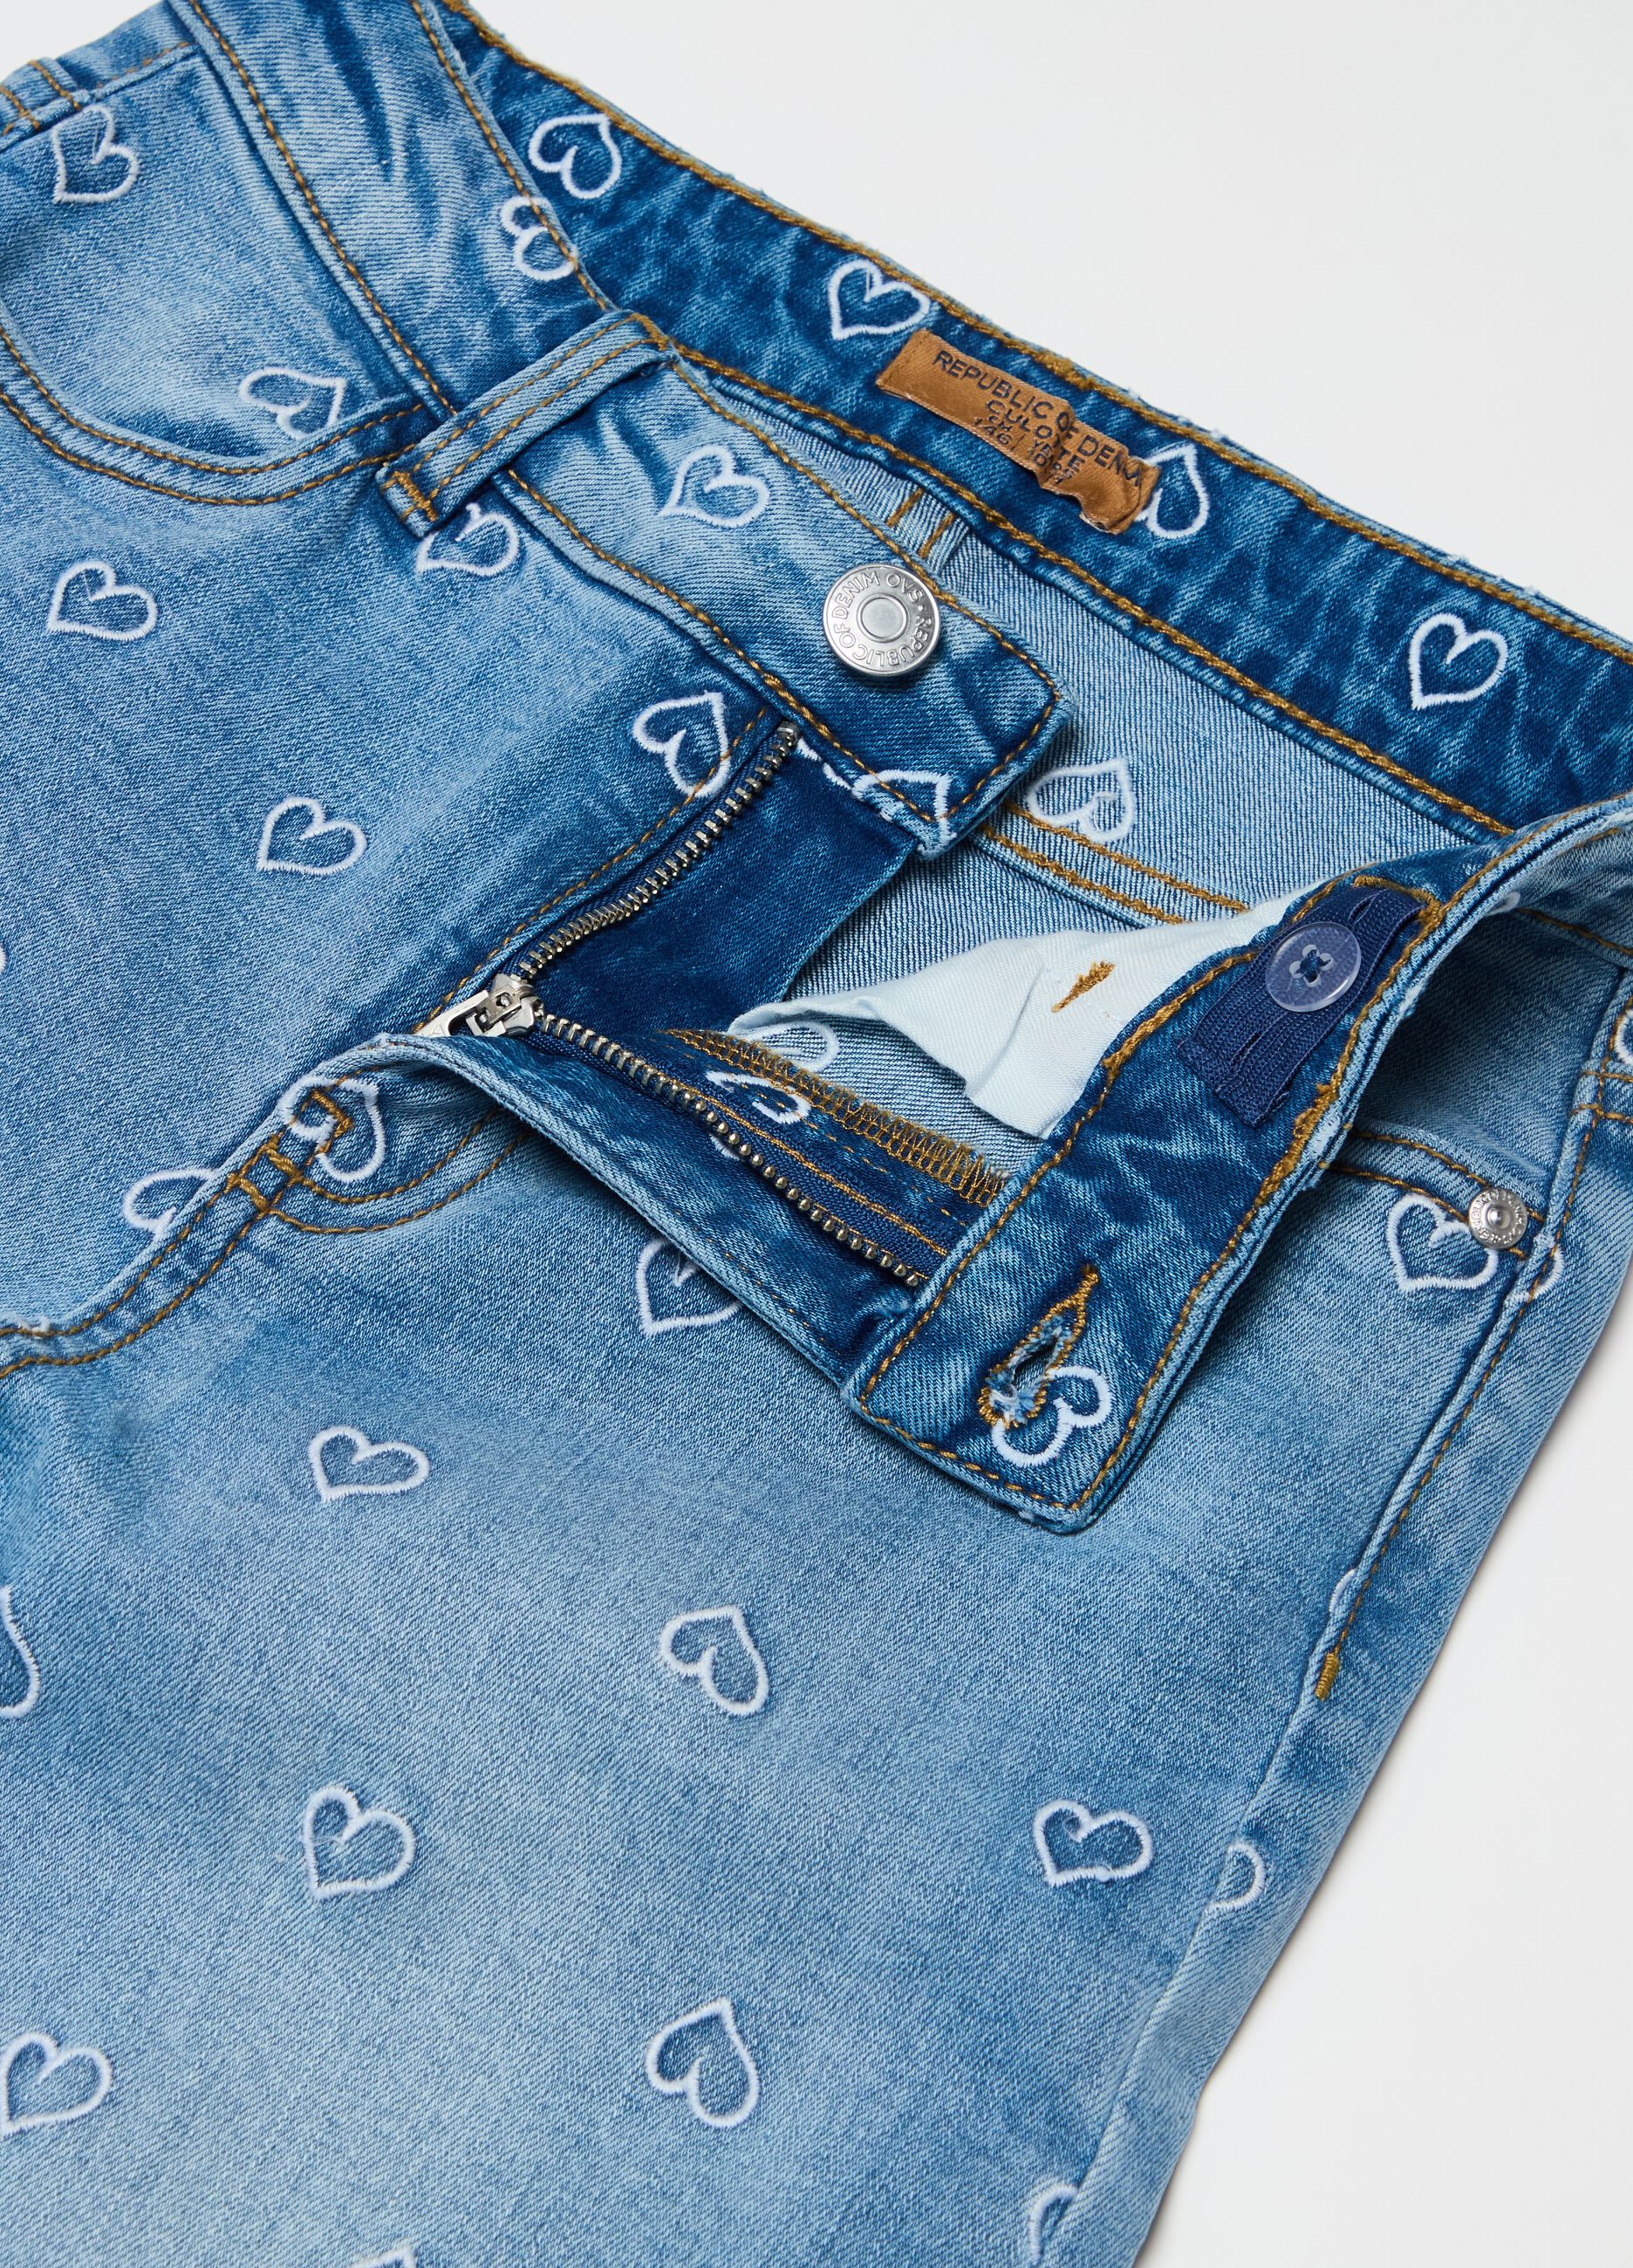 Culotte jeans with hearts embroidery